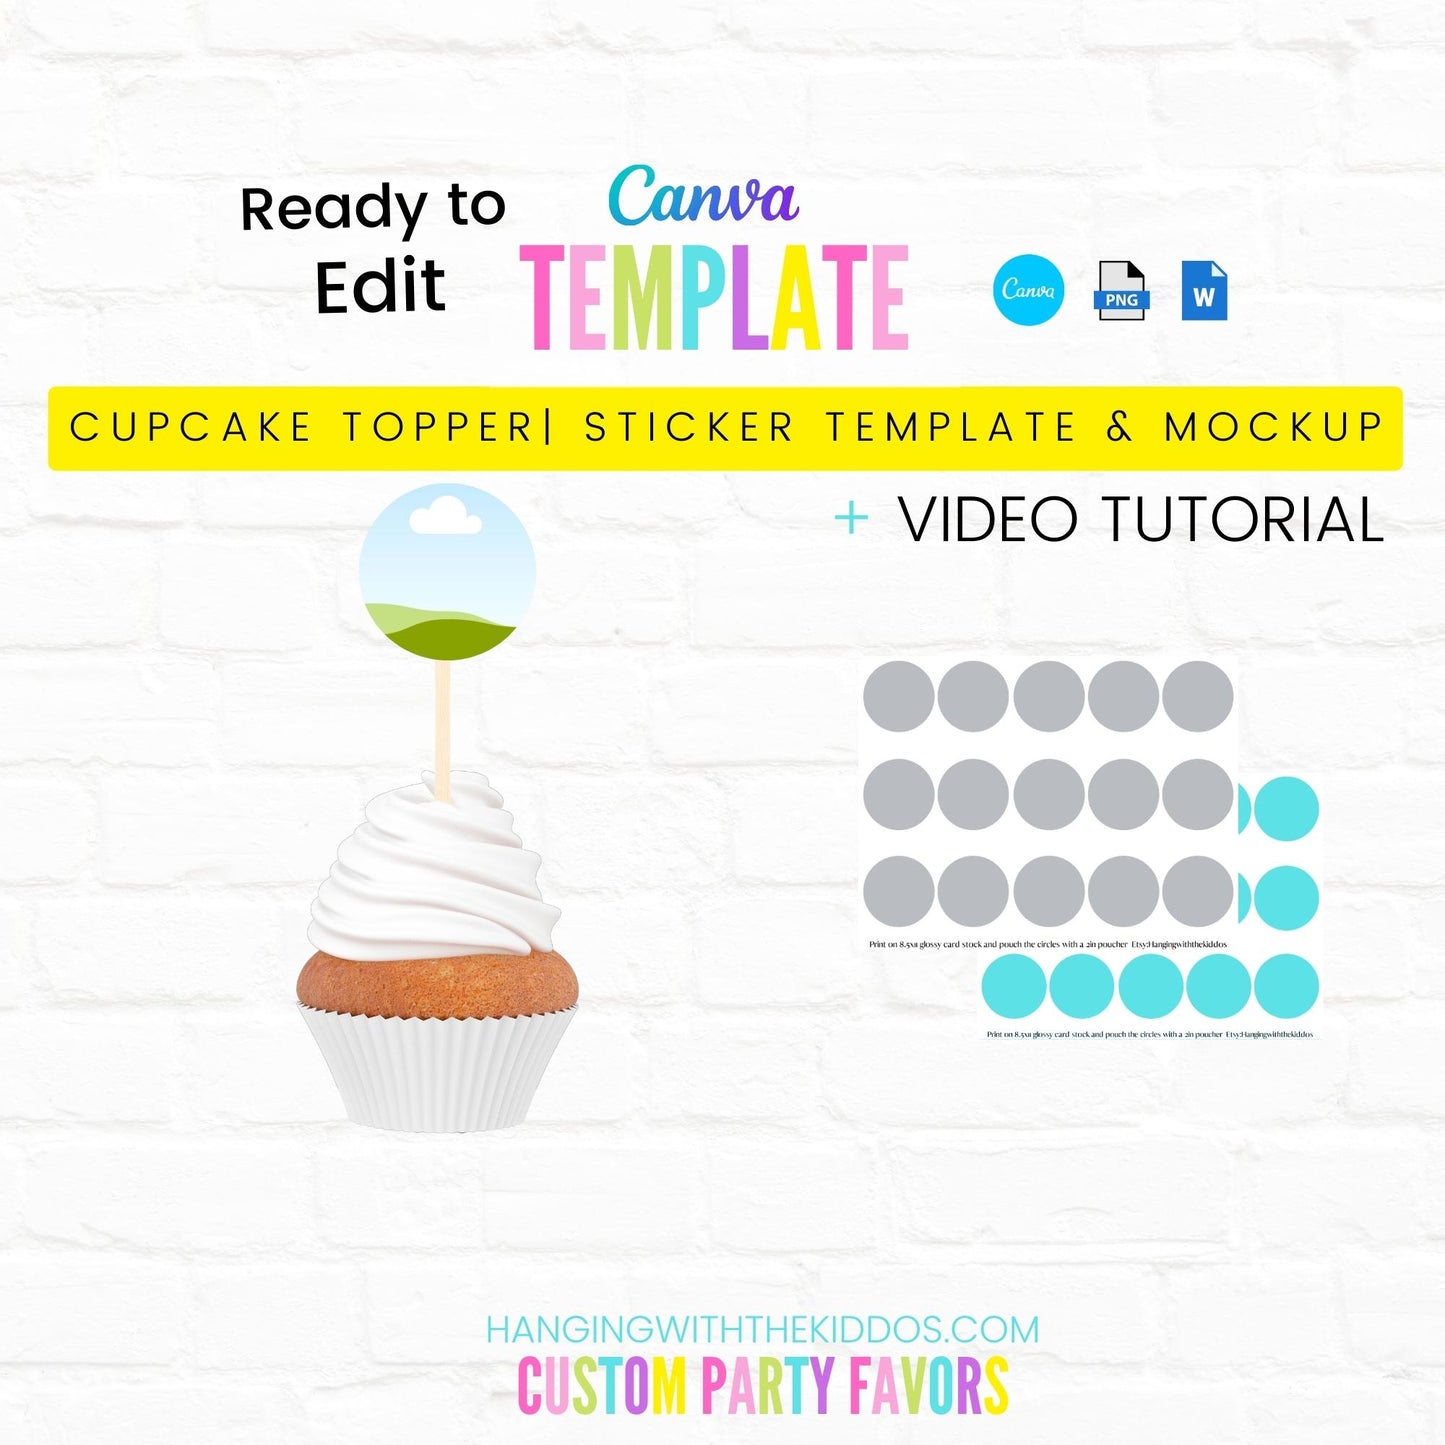 Cupcake Topper Template| 2 inch Round Stickers